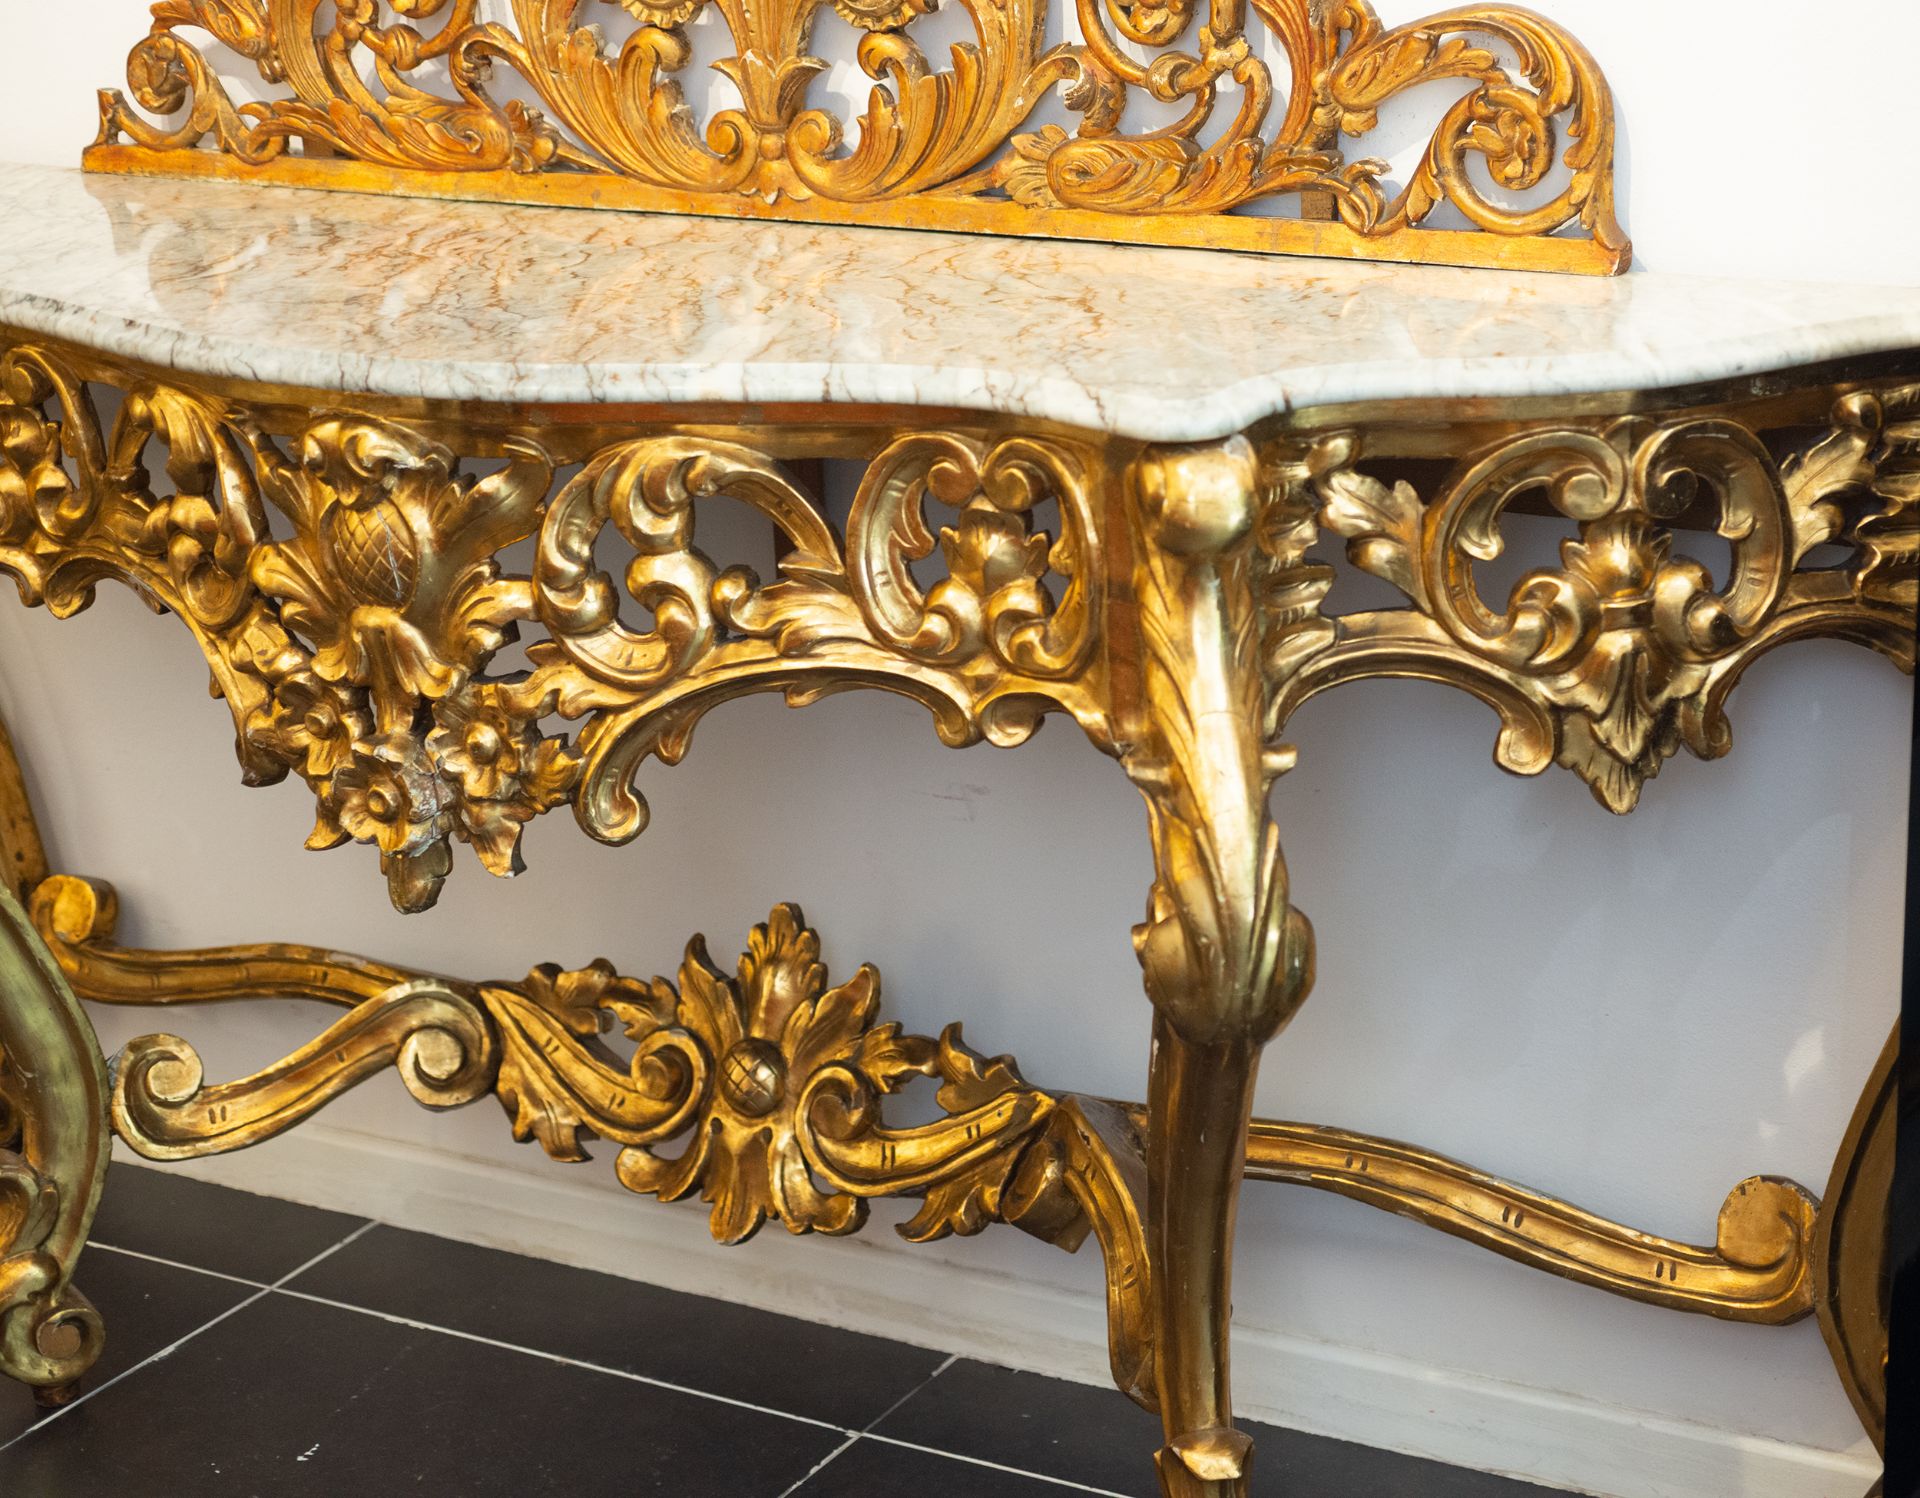 Italian console in gilt wood with gold leaf, Italian school of the 19th century - Image 4 of 7